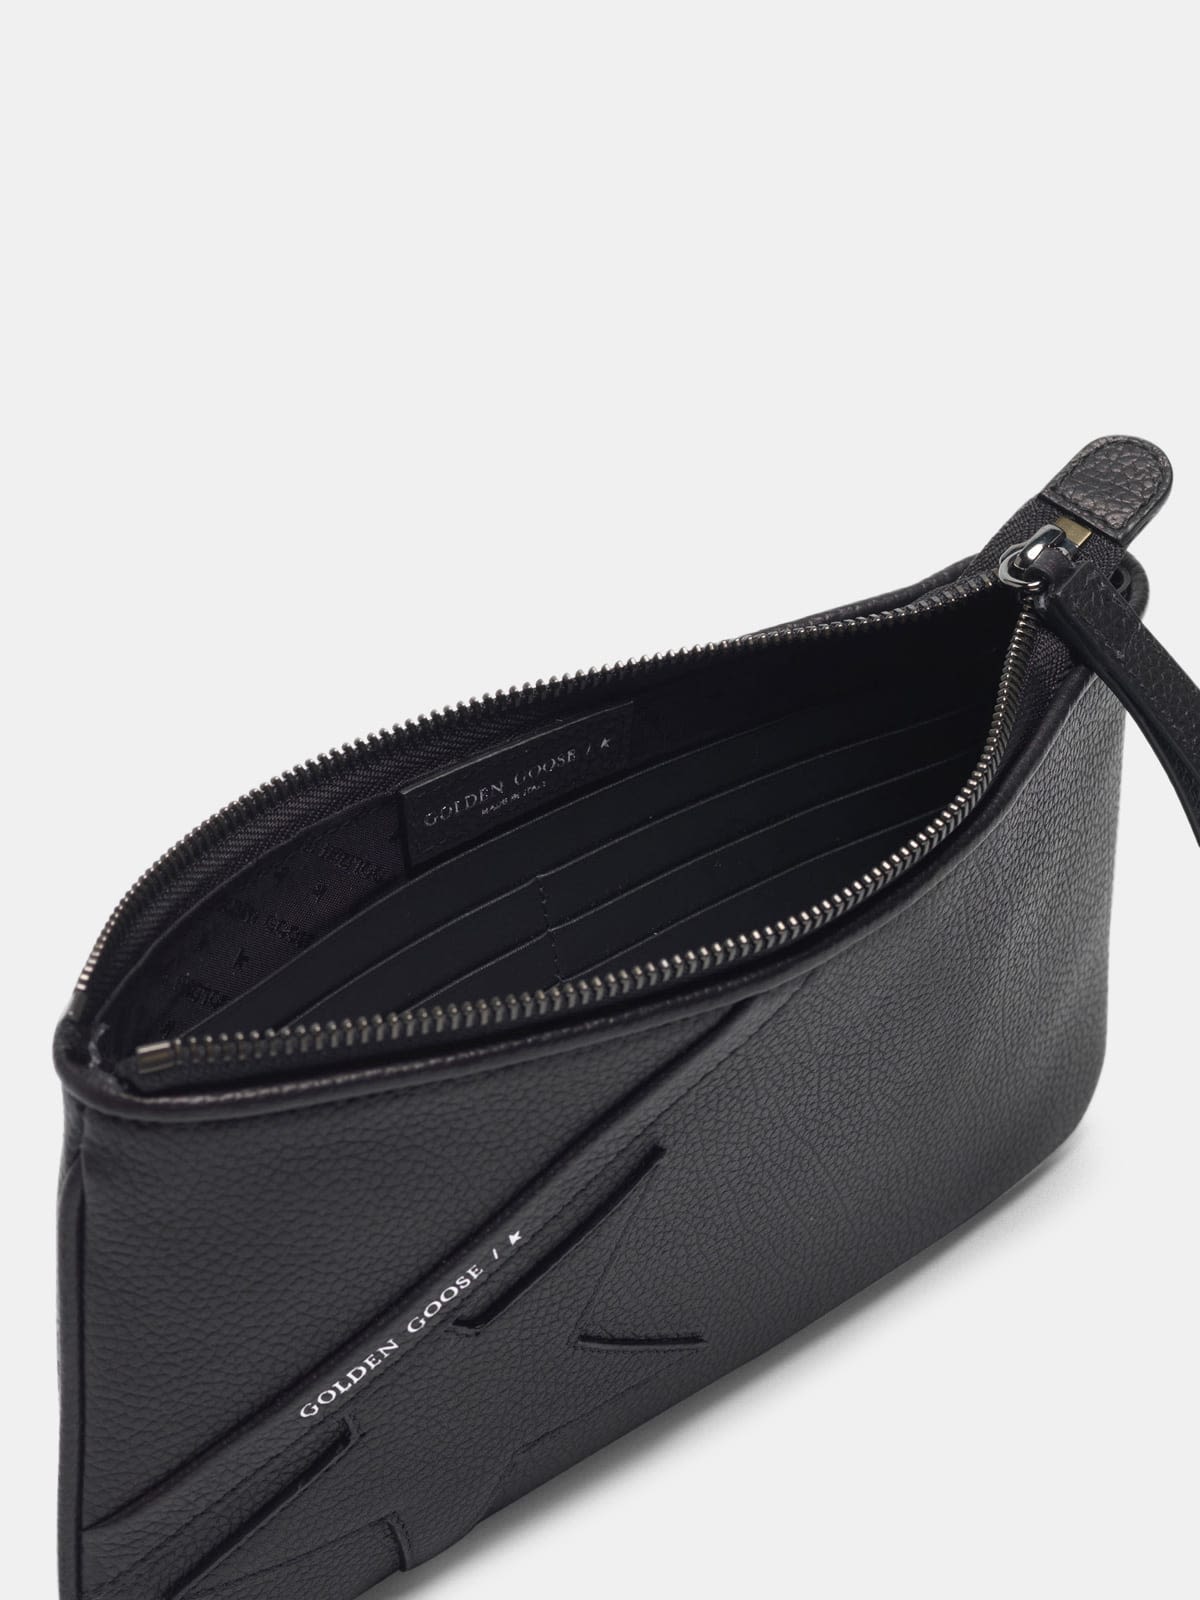 Black Star Wrist clutch bag in grained leather